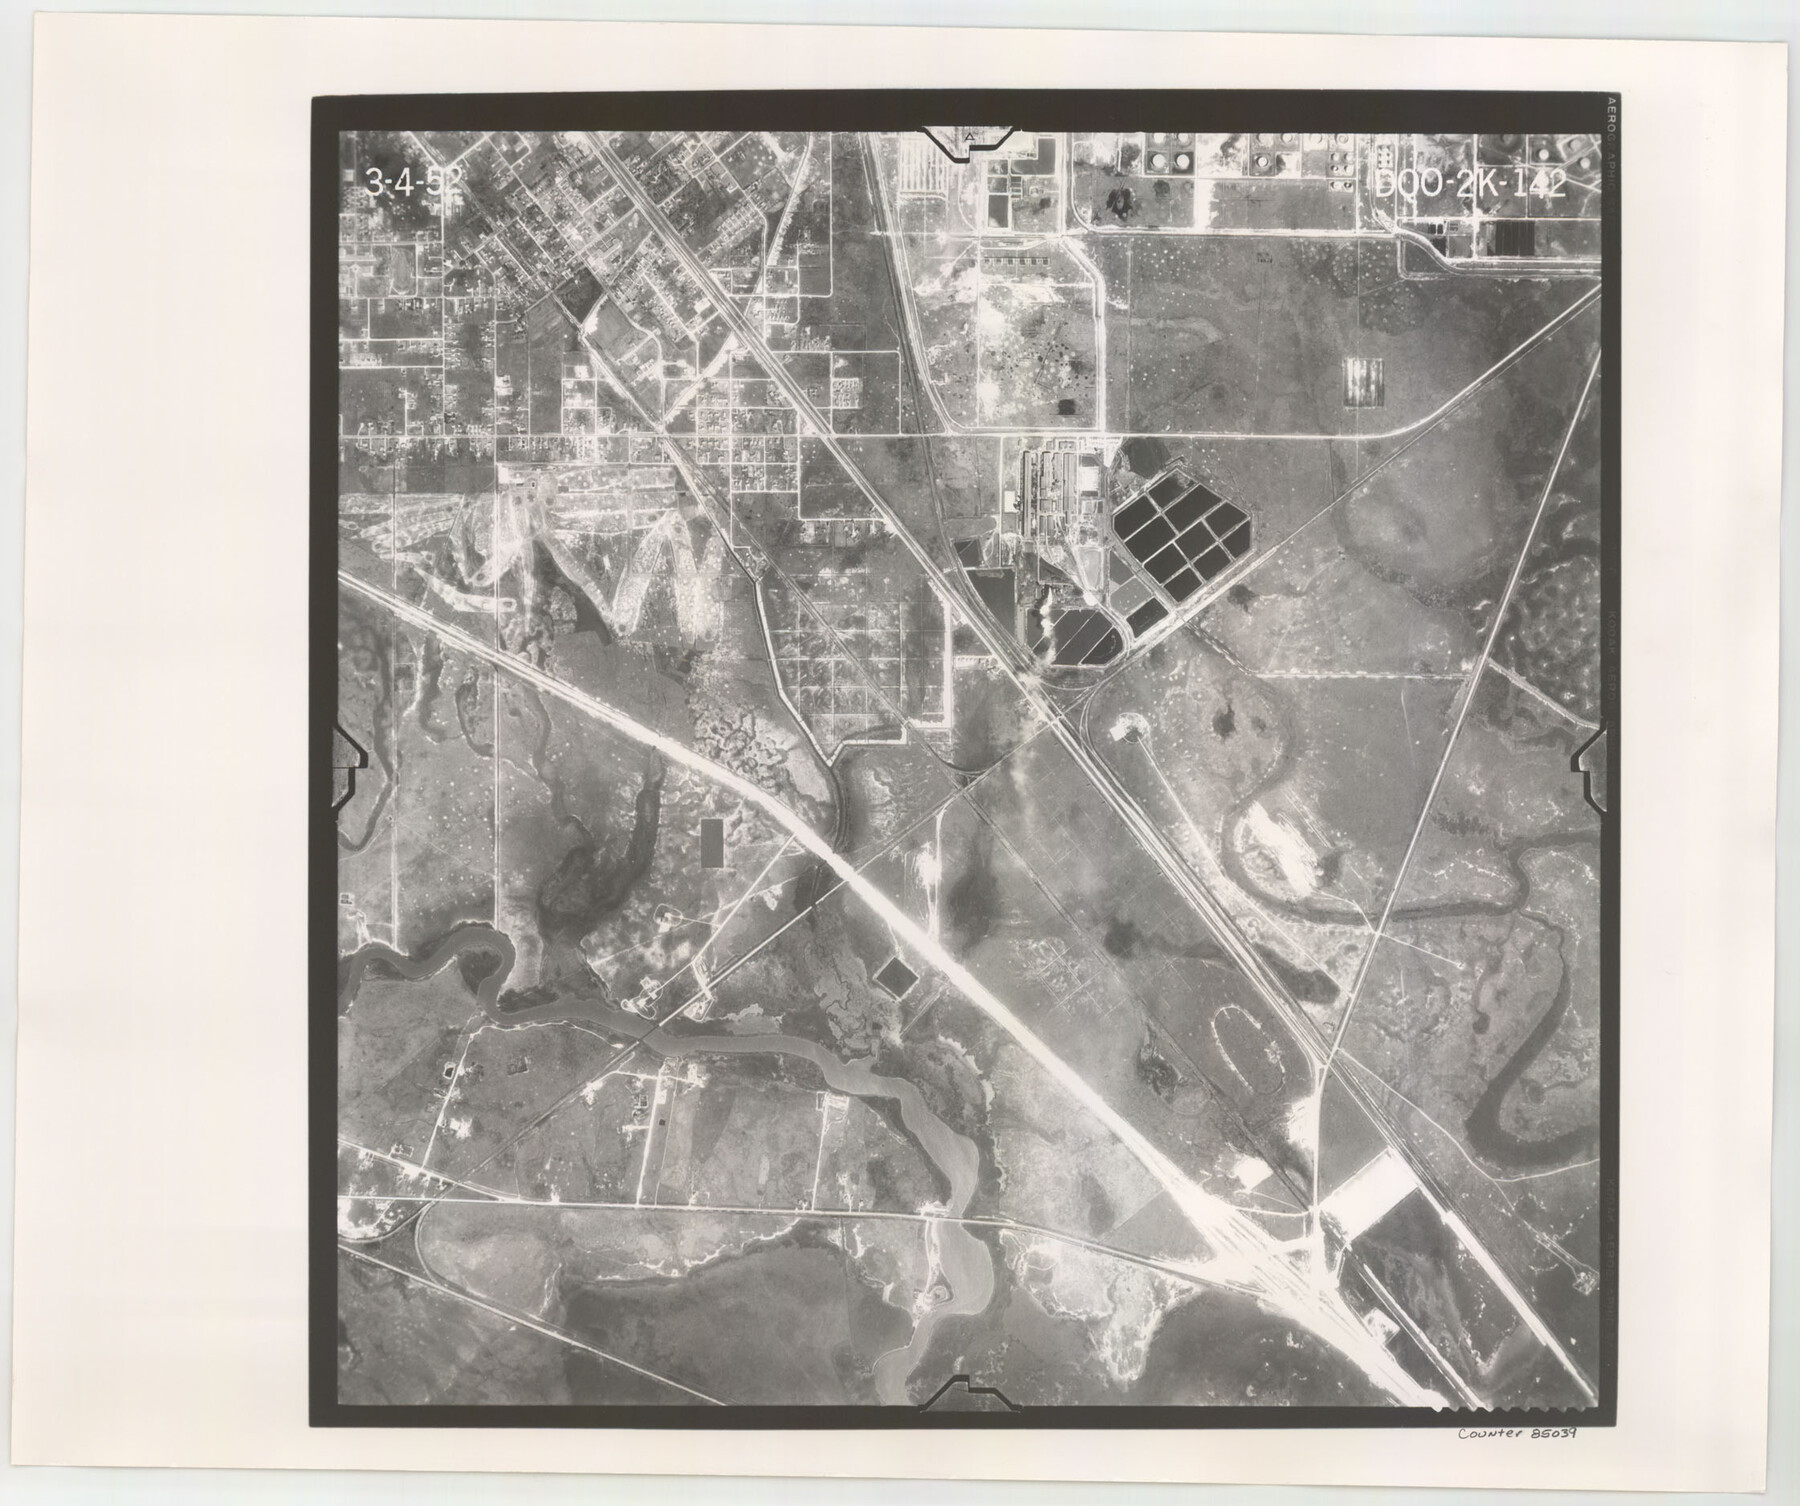 85039, Flight Mission No. DQO-2K, Frame 142, Galveston County, General Map Collection